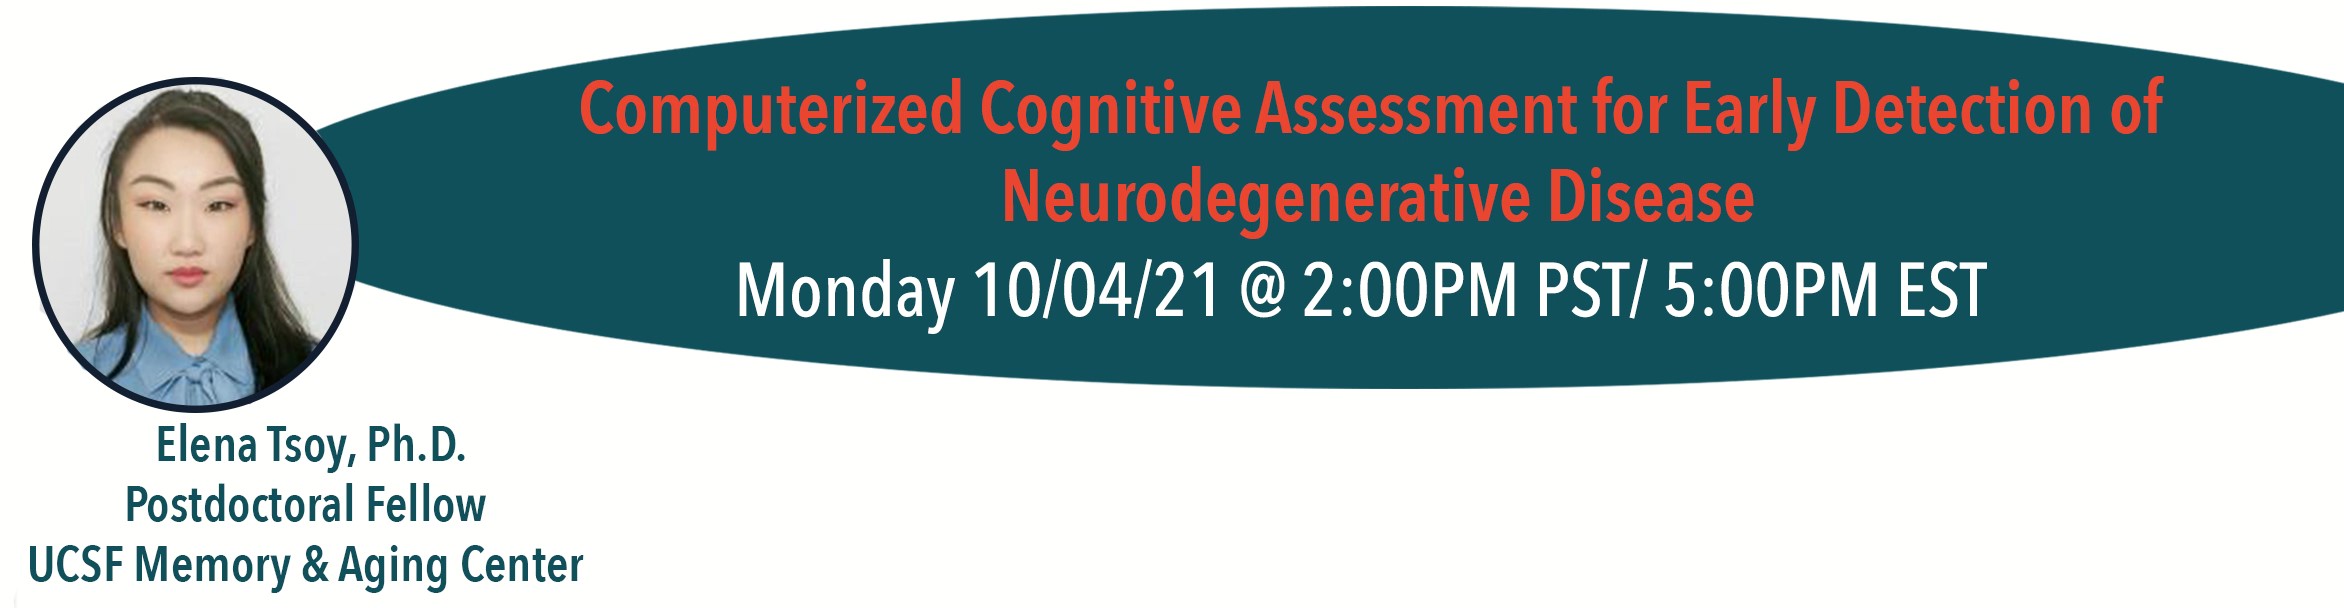 Computerized Cognitive Assessment for the early detection of neurodegenerative disease with Dr. Elena Tsoy